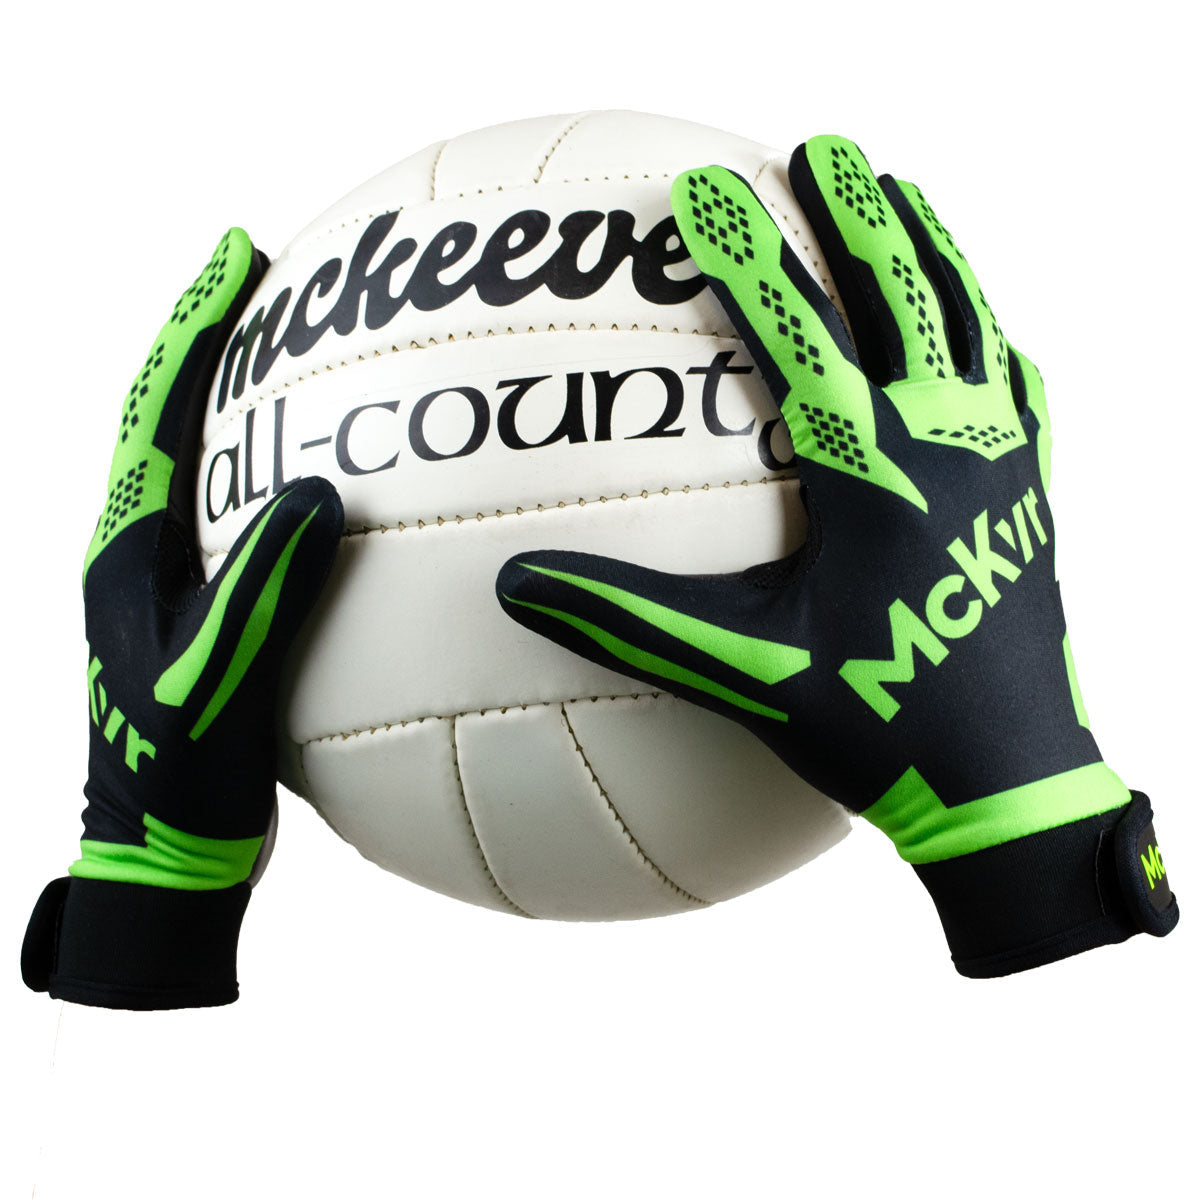 Mc Keever 2.0 Gaelic Gloves - Youth - Black/Lime Green